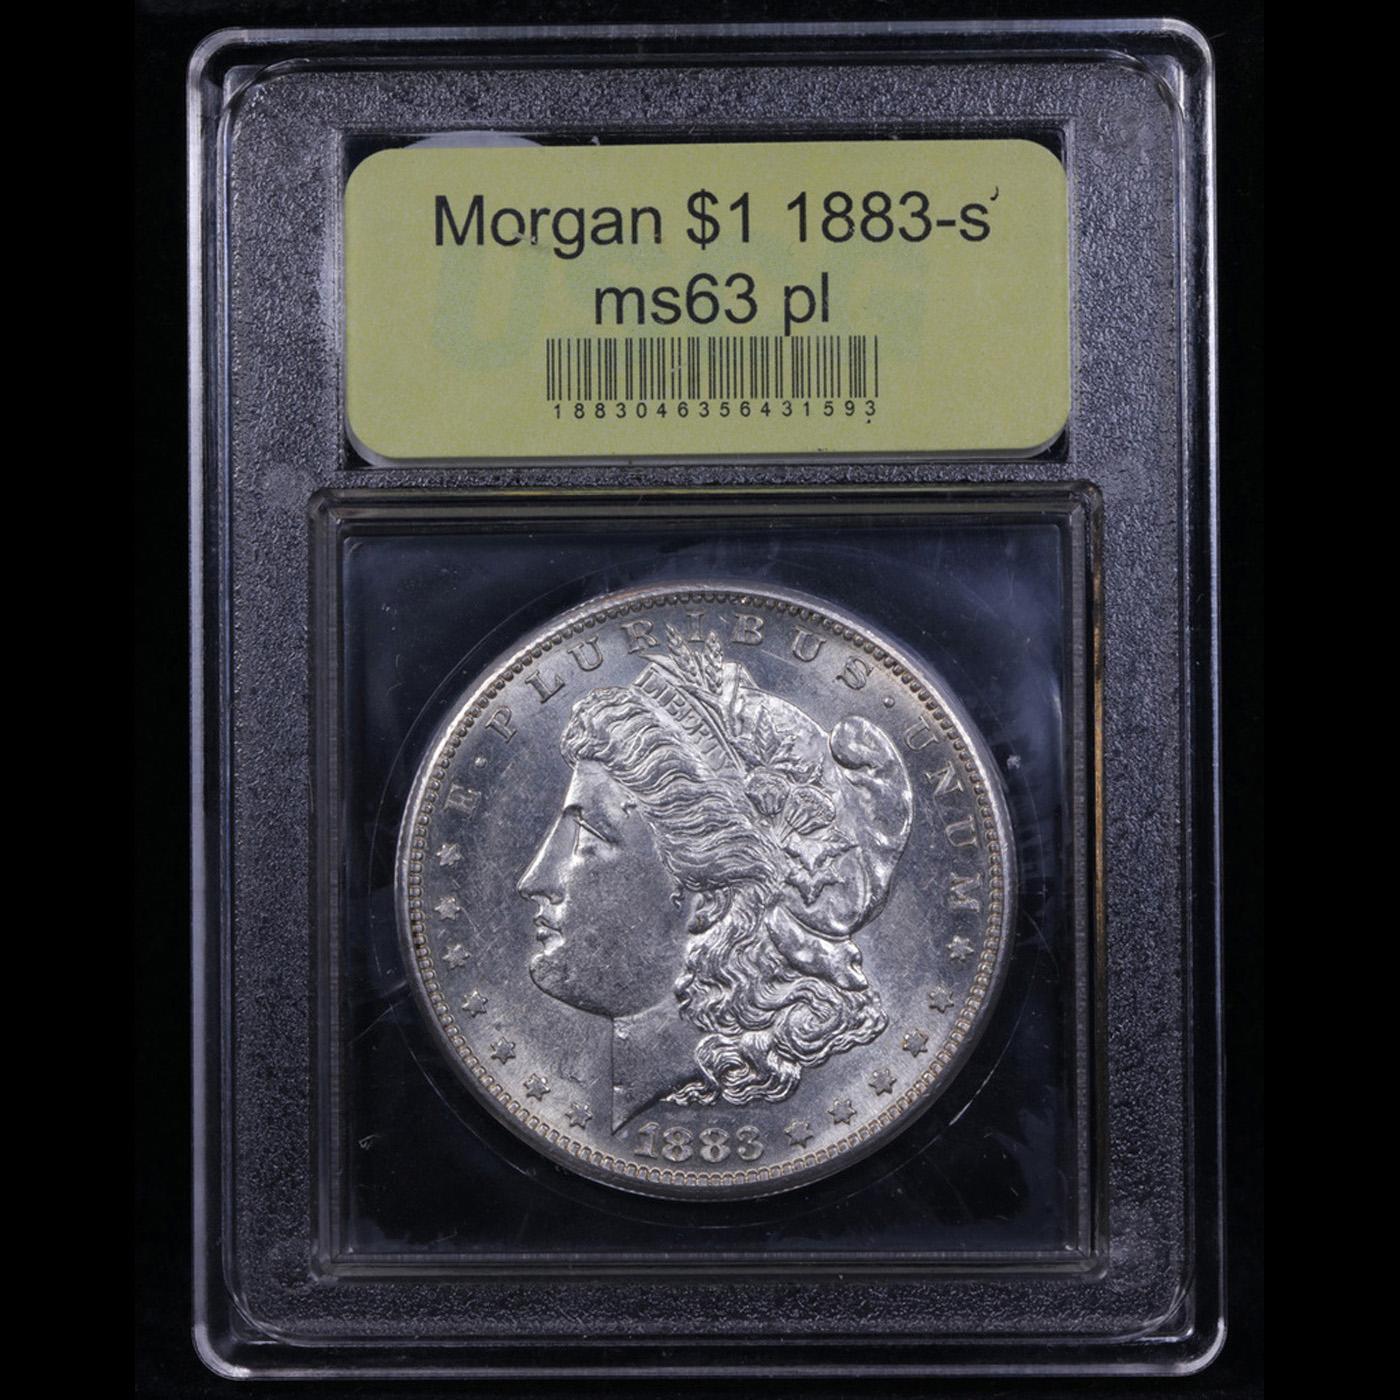 ***Auction Highlight*** 1883-s Morgan Dollar $1 Graded Select Unc PL By USCG (fc)